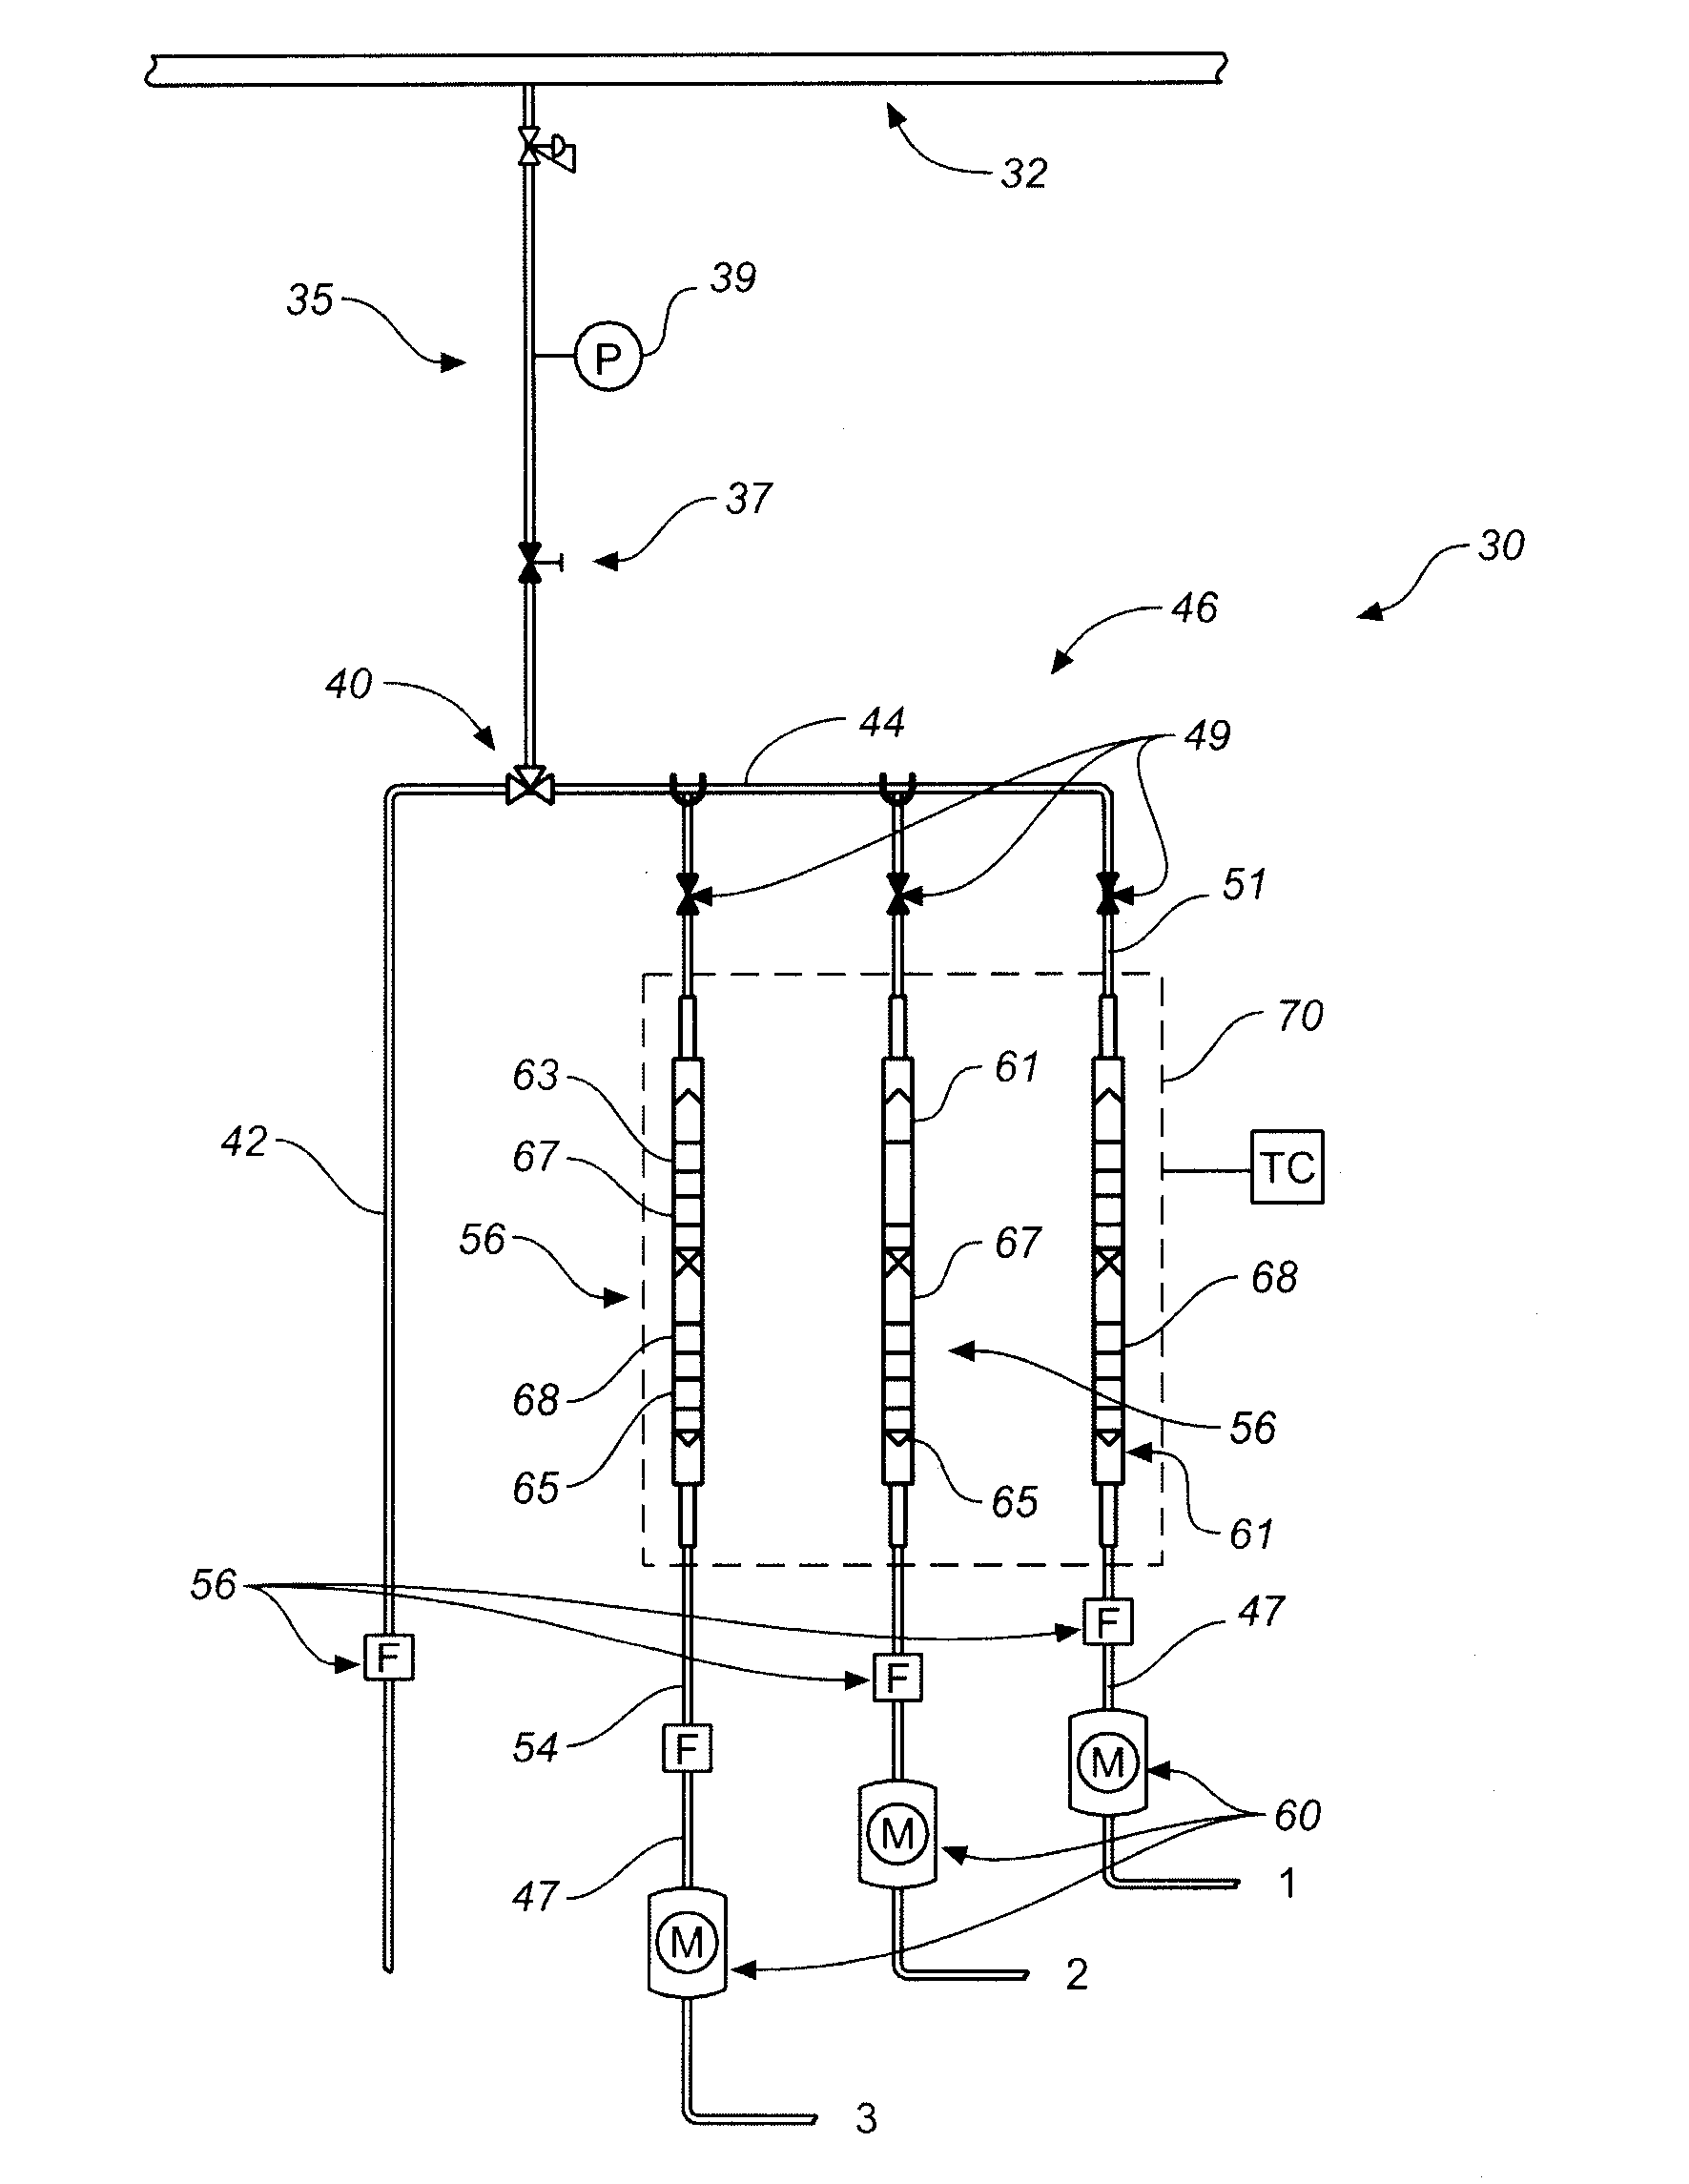 Sampling apparatus for constituents in natural gas lines